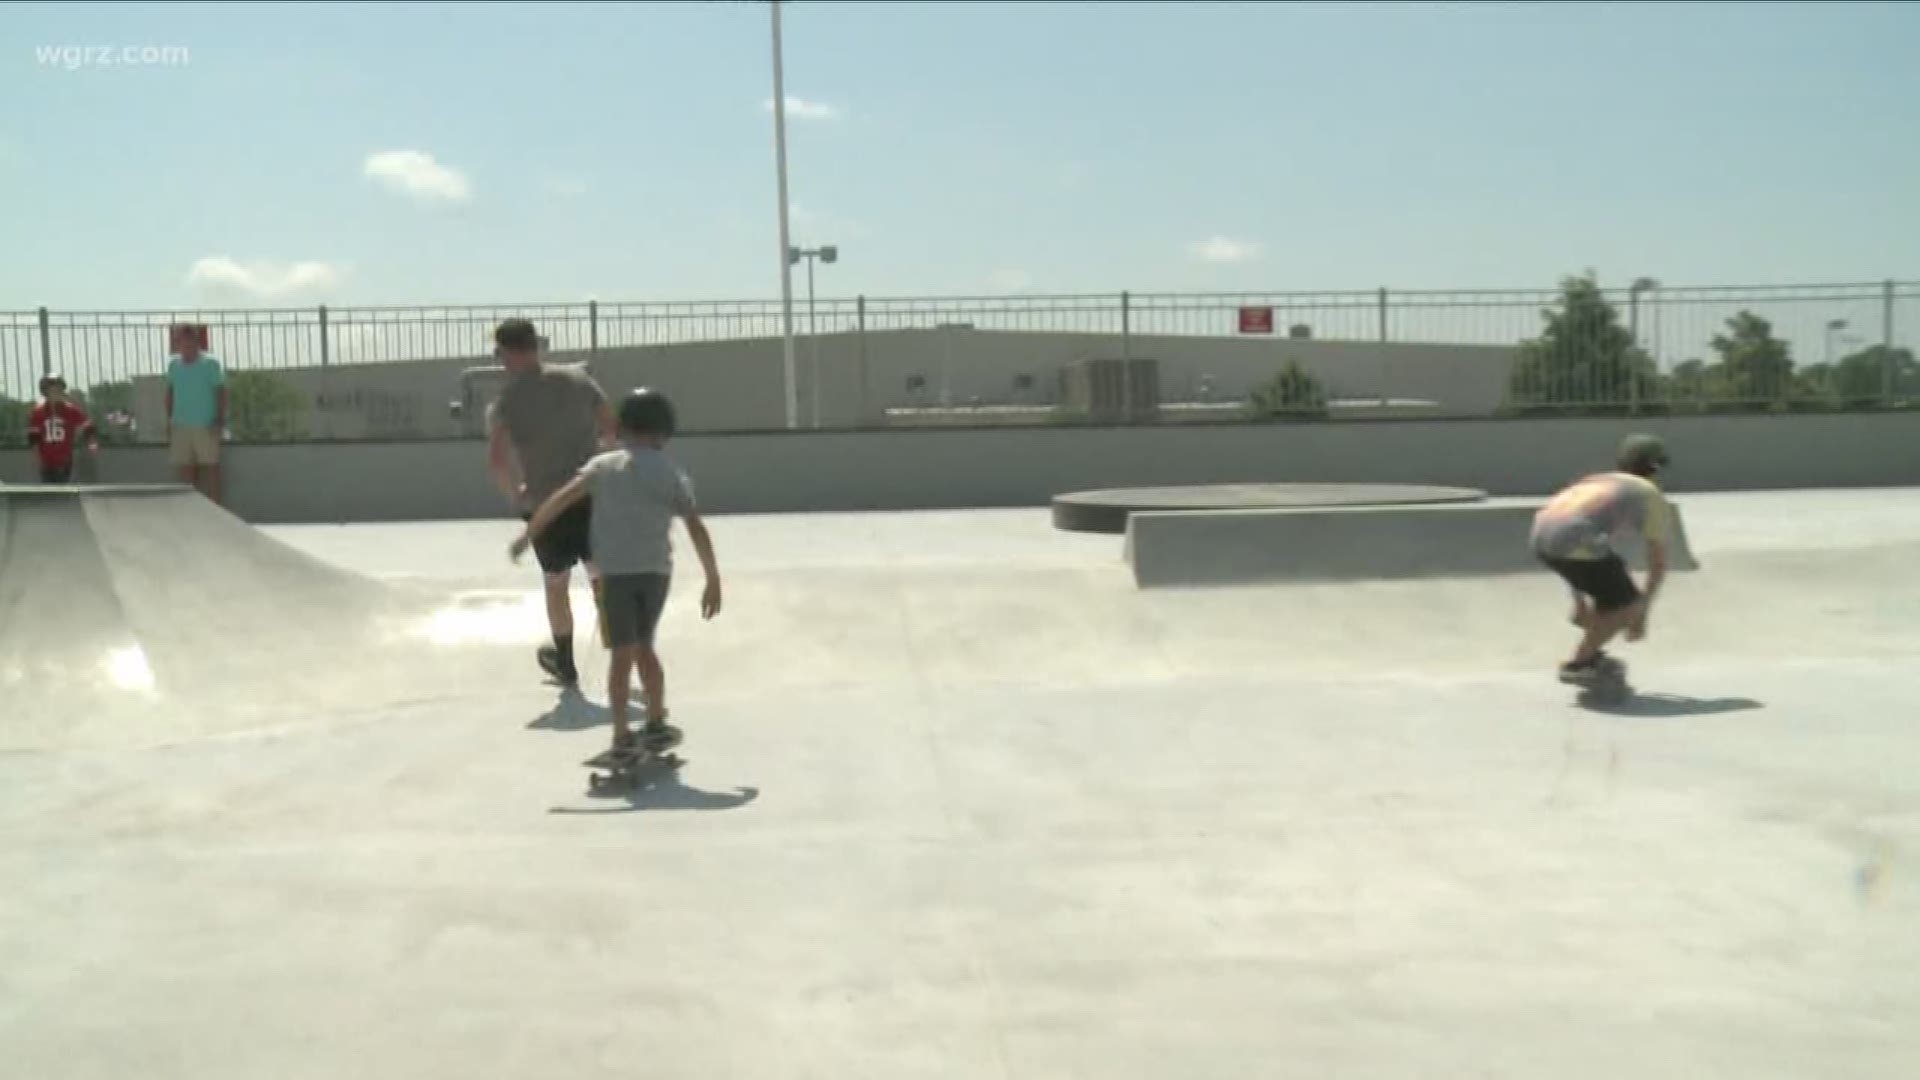 Ribbon cutting held for opening of Alix Rice Skatepark